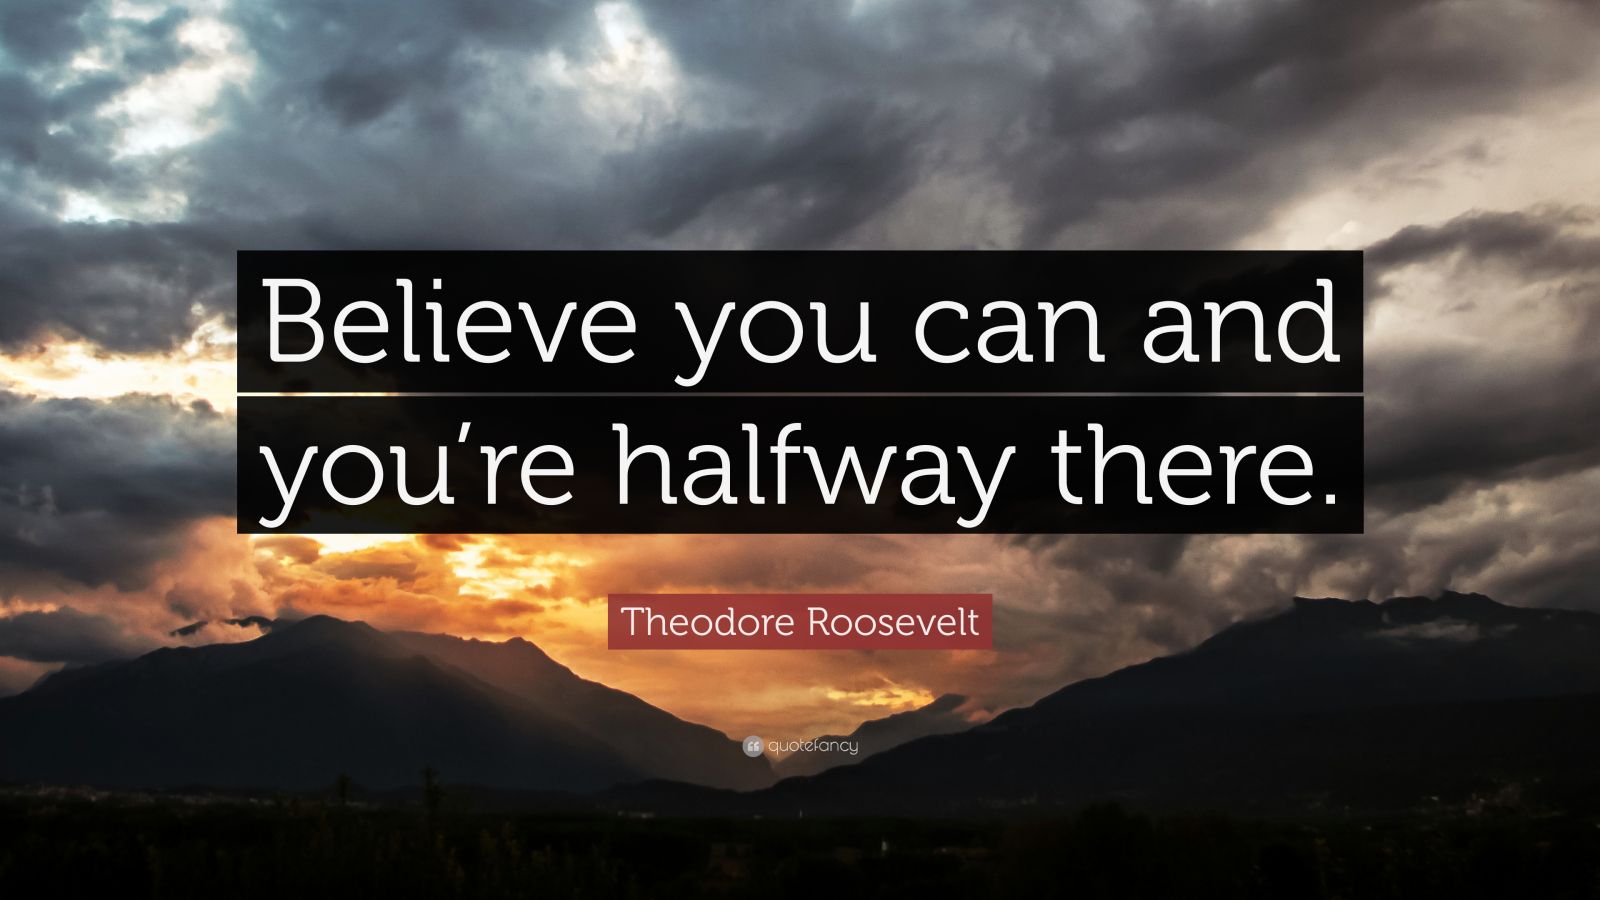 Theodore Roosevelt Quote: “Believe you can and you’re halfway there